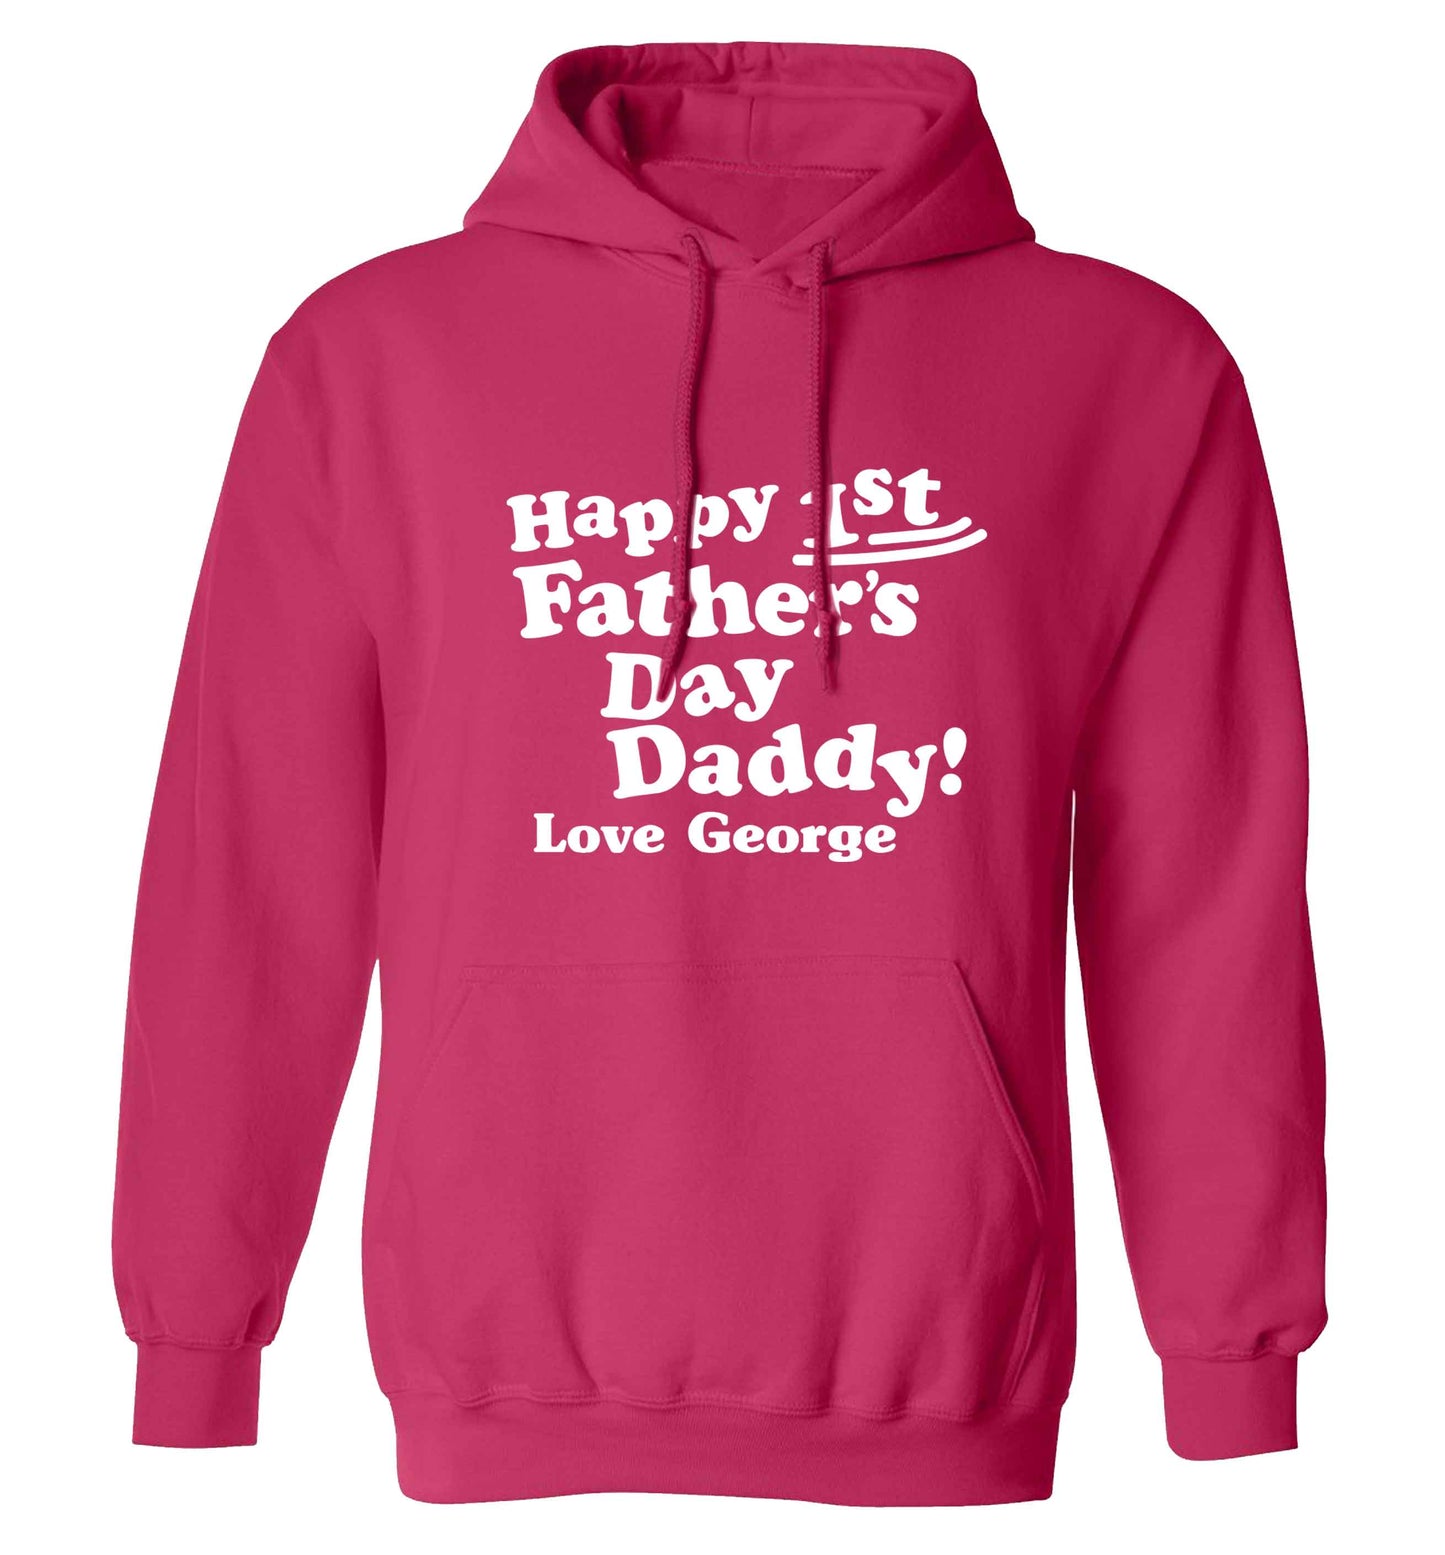 Happy first Fathers Day daddy love personalised adults unisex pink hoodie 2XL